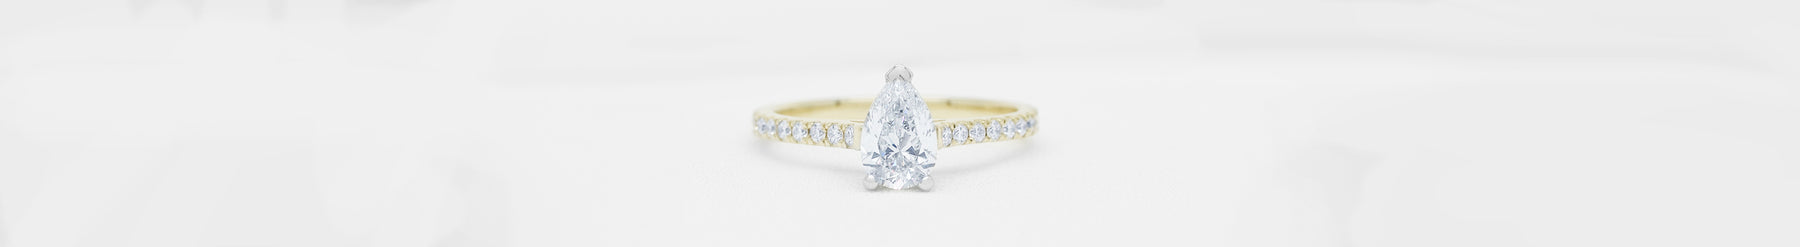 Pear Cut Diamond Engagement Ring with Diamond Set Band in Yellow Gold and Platinum by The Village Goldsmith